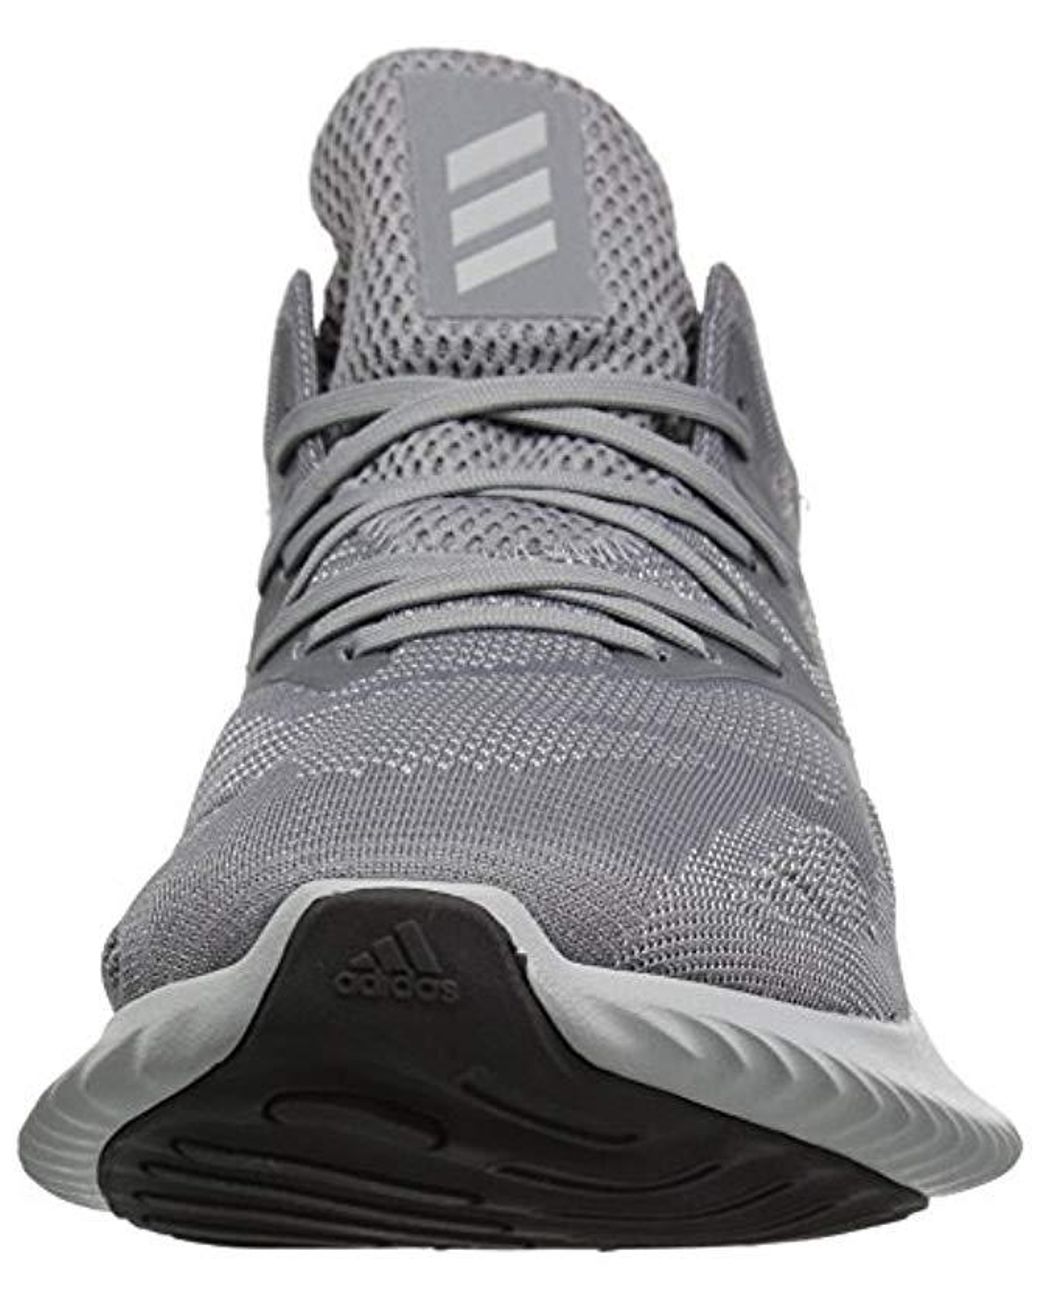 adidas Originals Synthetic Alphabounce Beyond (grey Two/grey Two/grey One)  Men's Running Shoes in Grey/Grey/Grey (Gray) for Men | Lyst